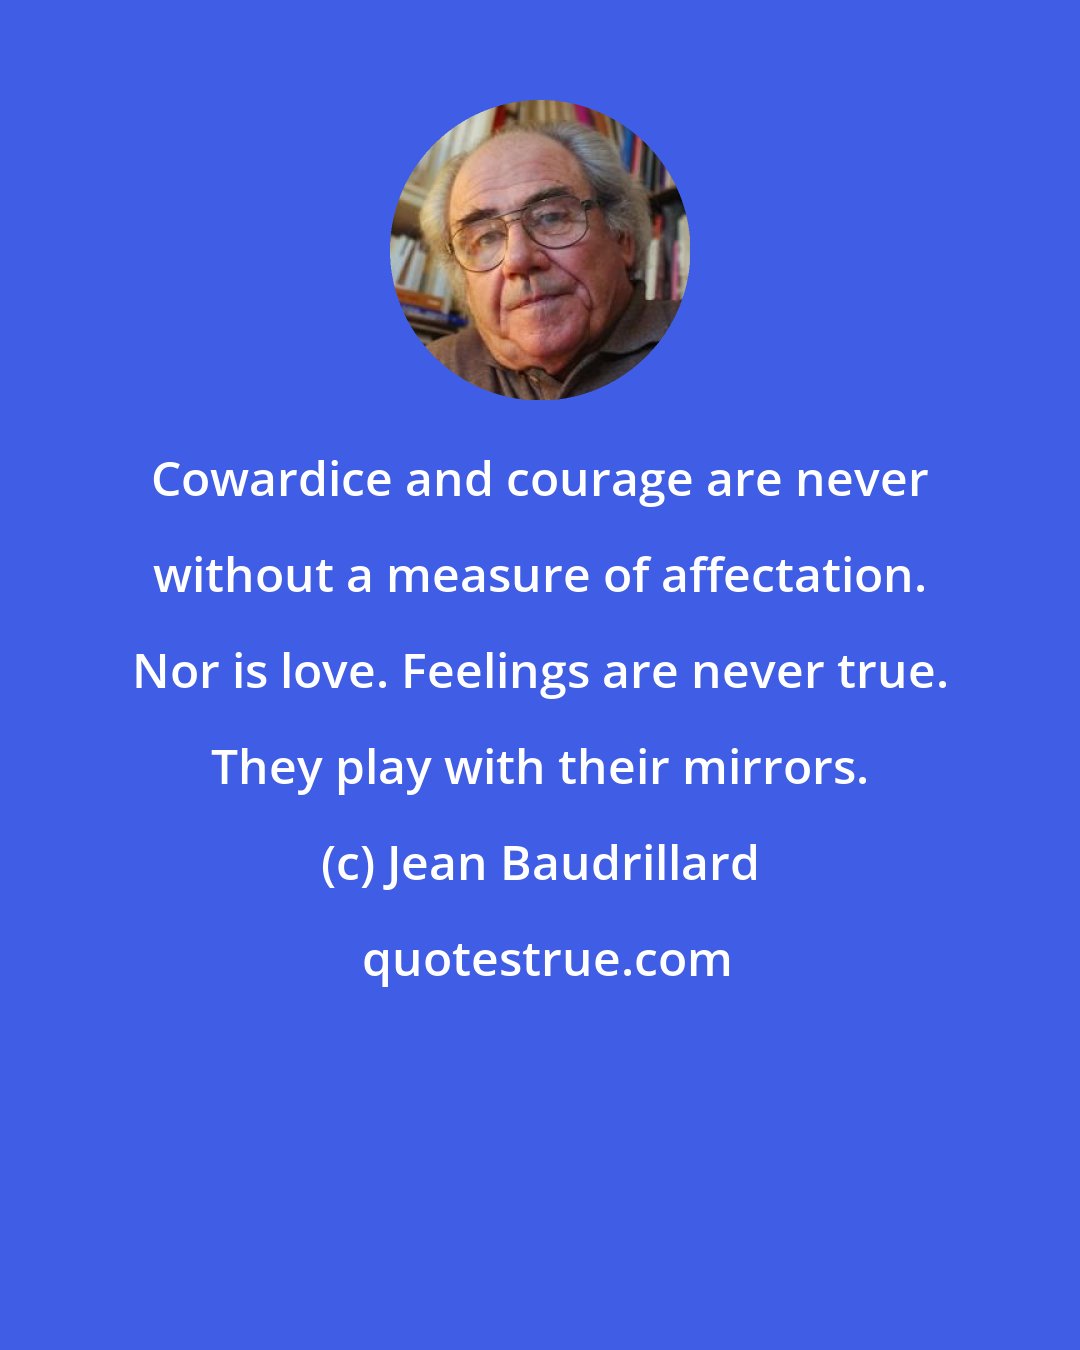 Jean Baudrillard: Cowardice and courage are never without a measure of affectation. Nor is love. Feelings are never true. They play with their mirrors.